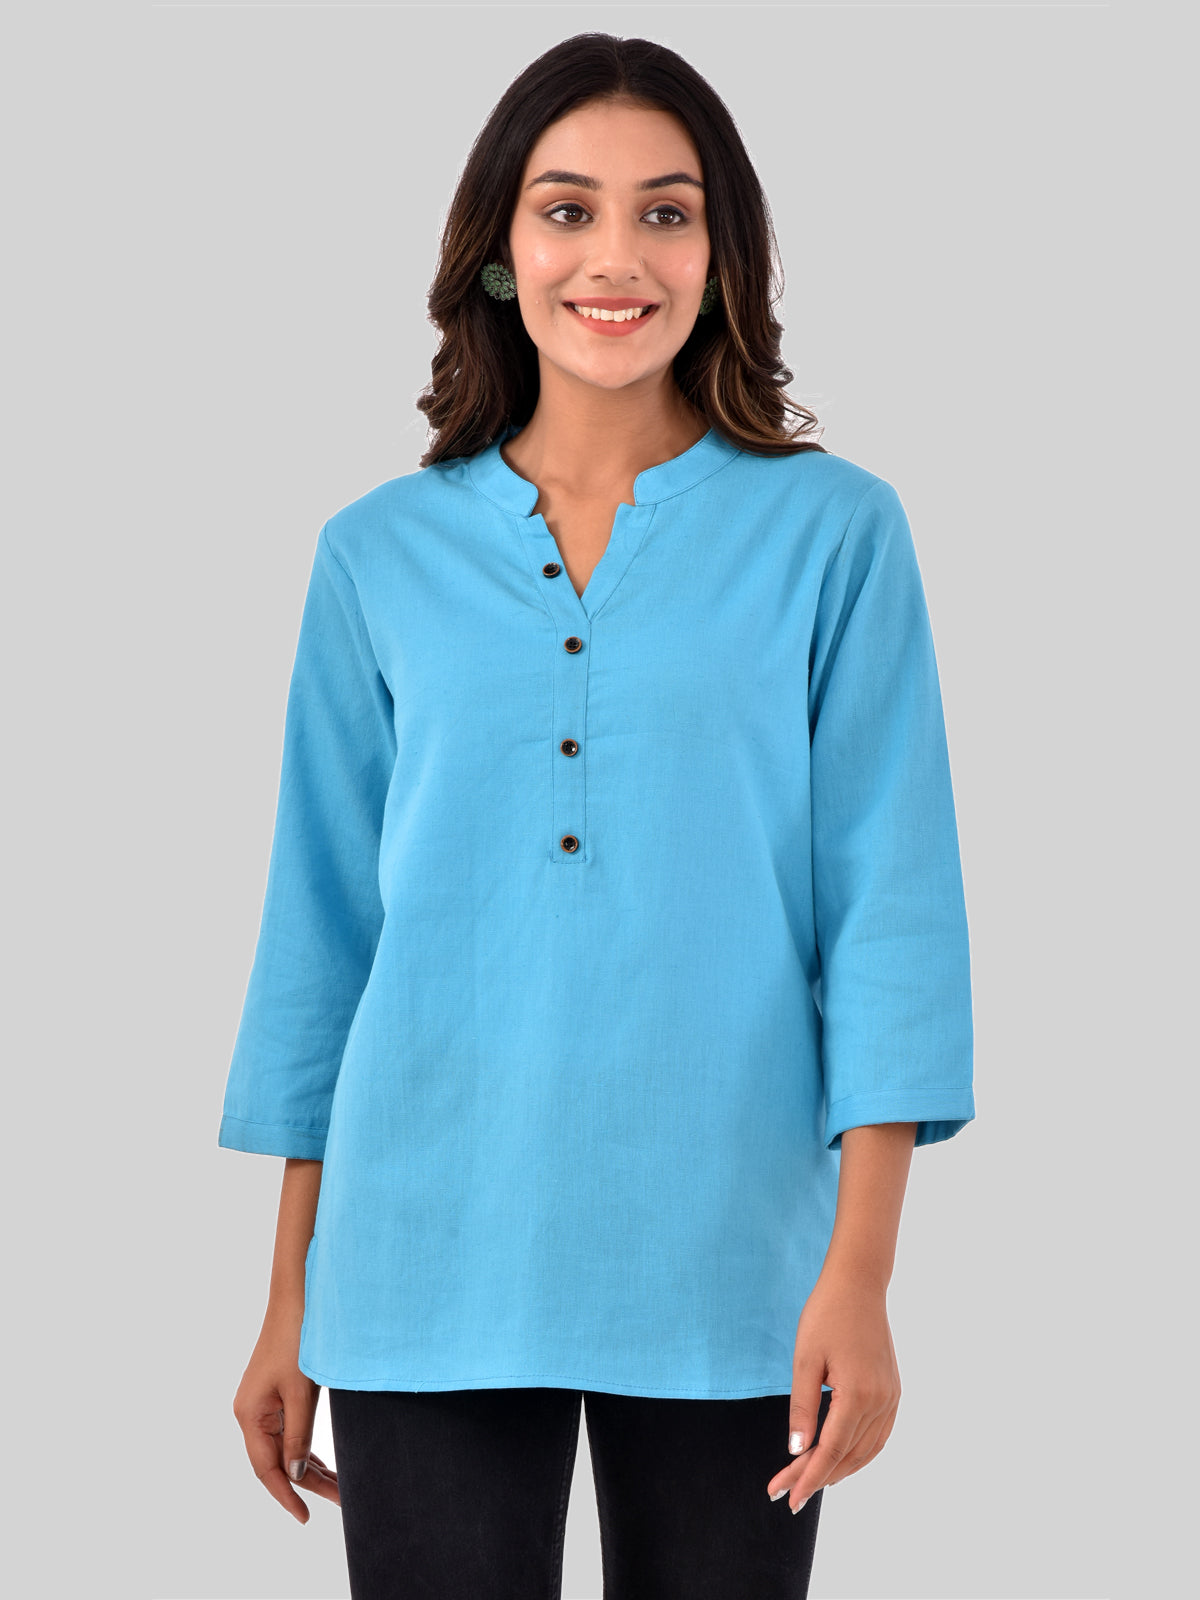 Pack Of 2 Womens Regular Fit Turquoise And Black Three Fourth Sleeve Cotton Tops Combo